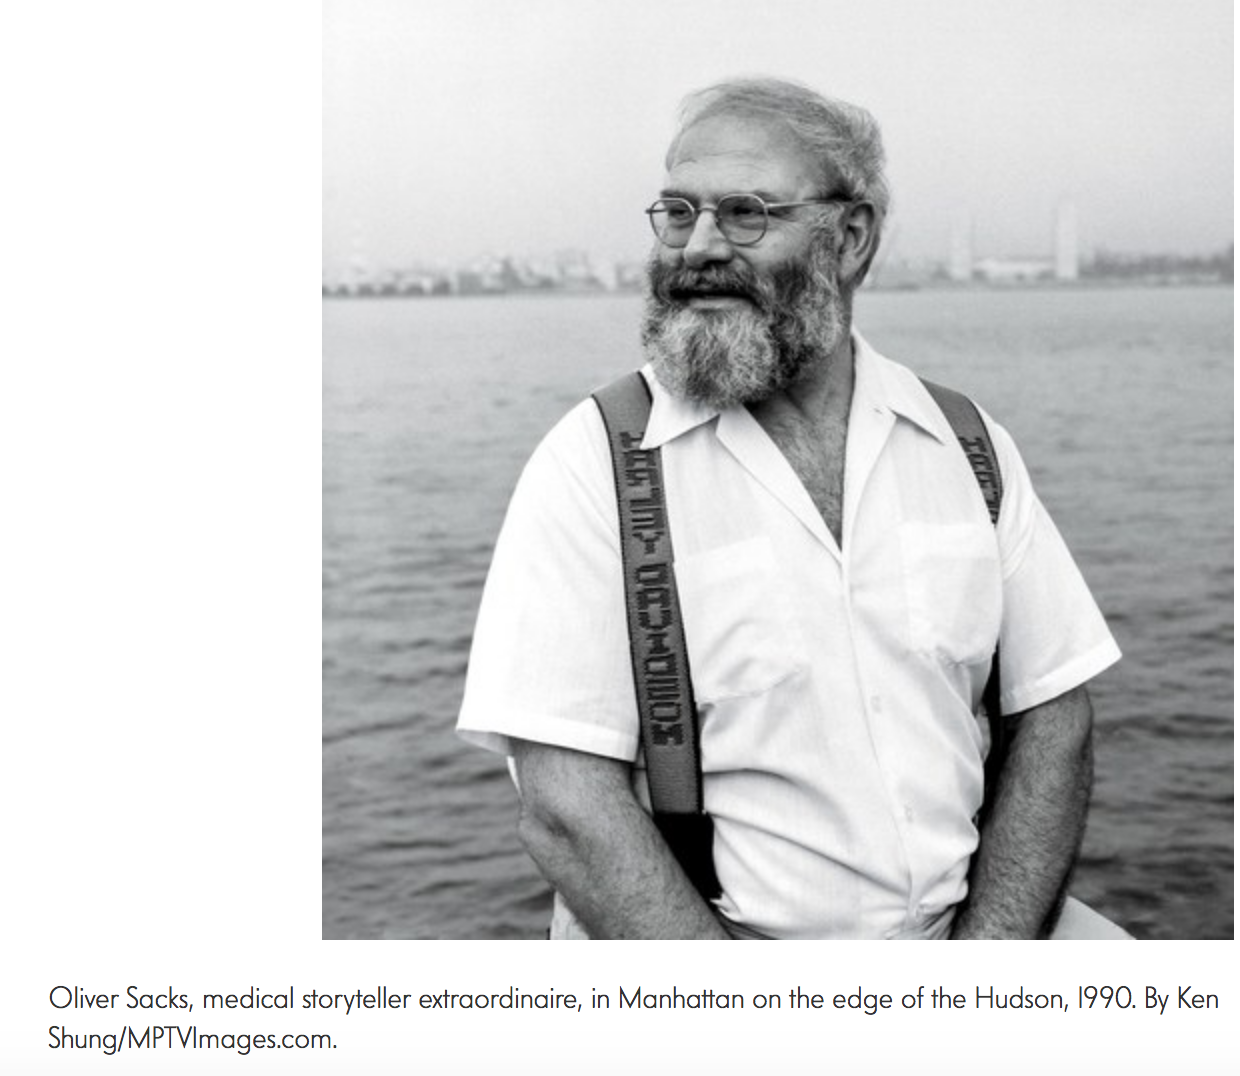 Oliver Sacks recognized the importance of stories